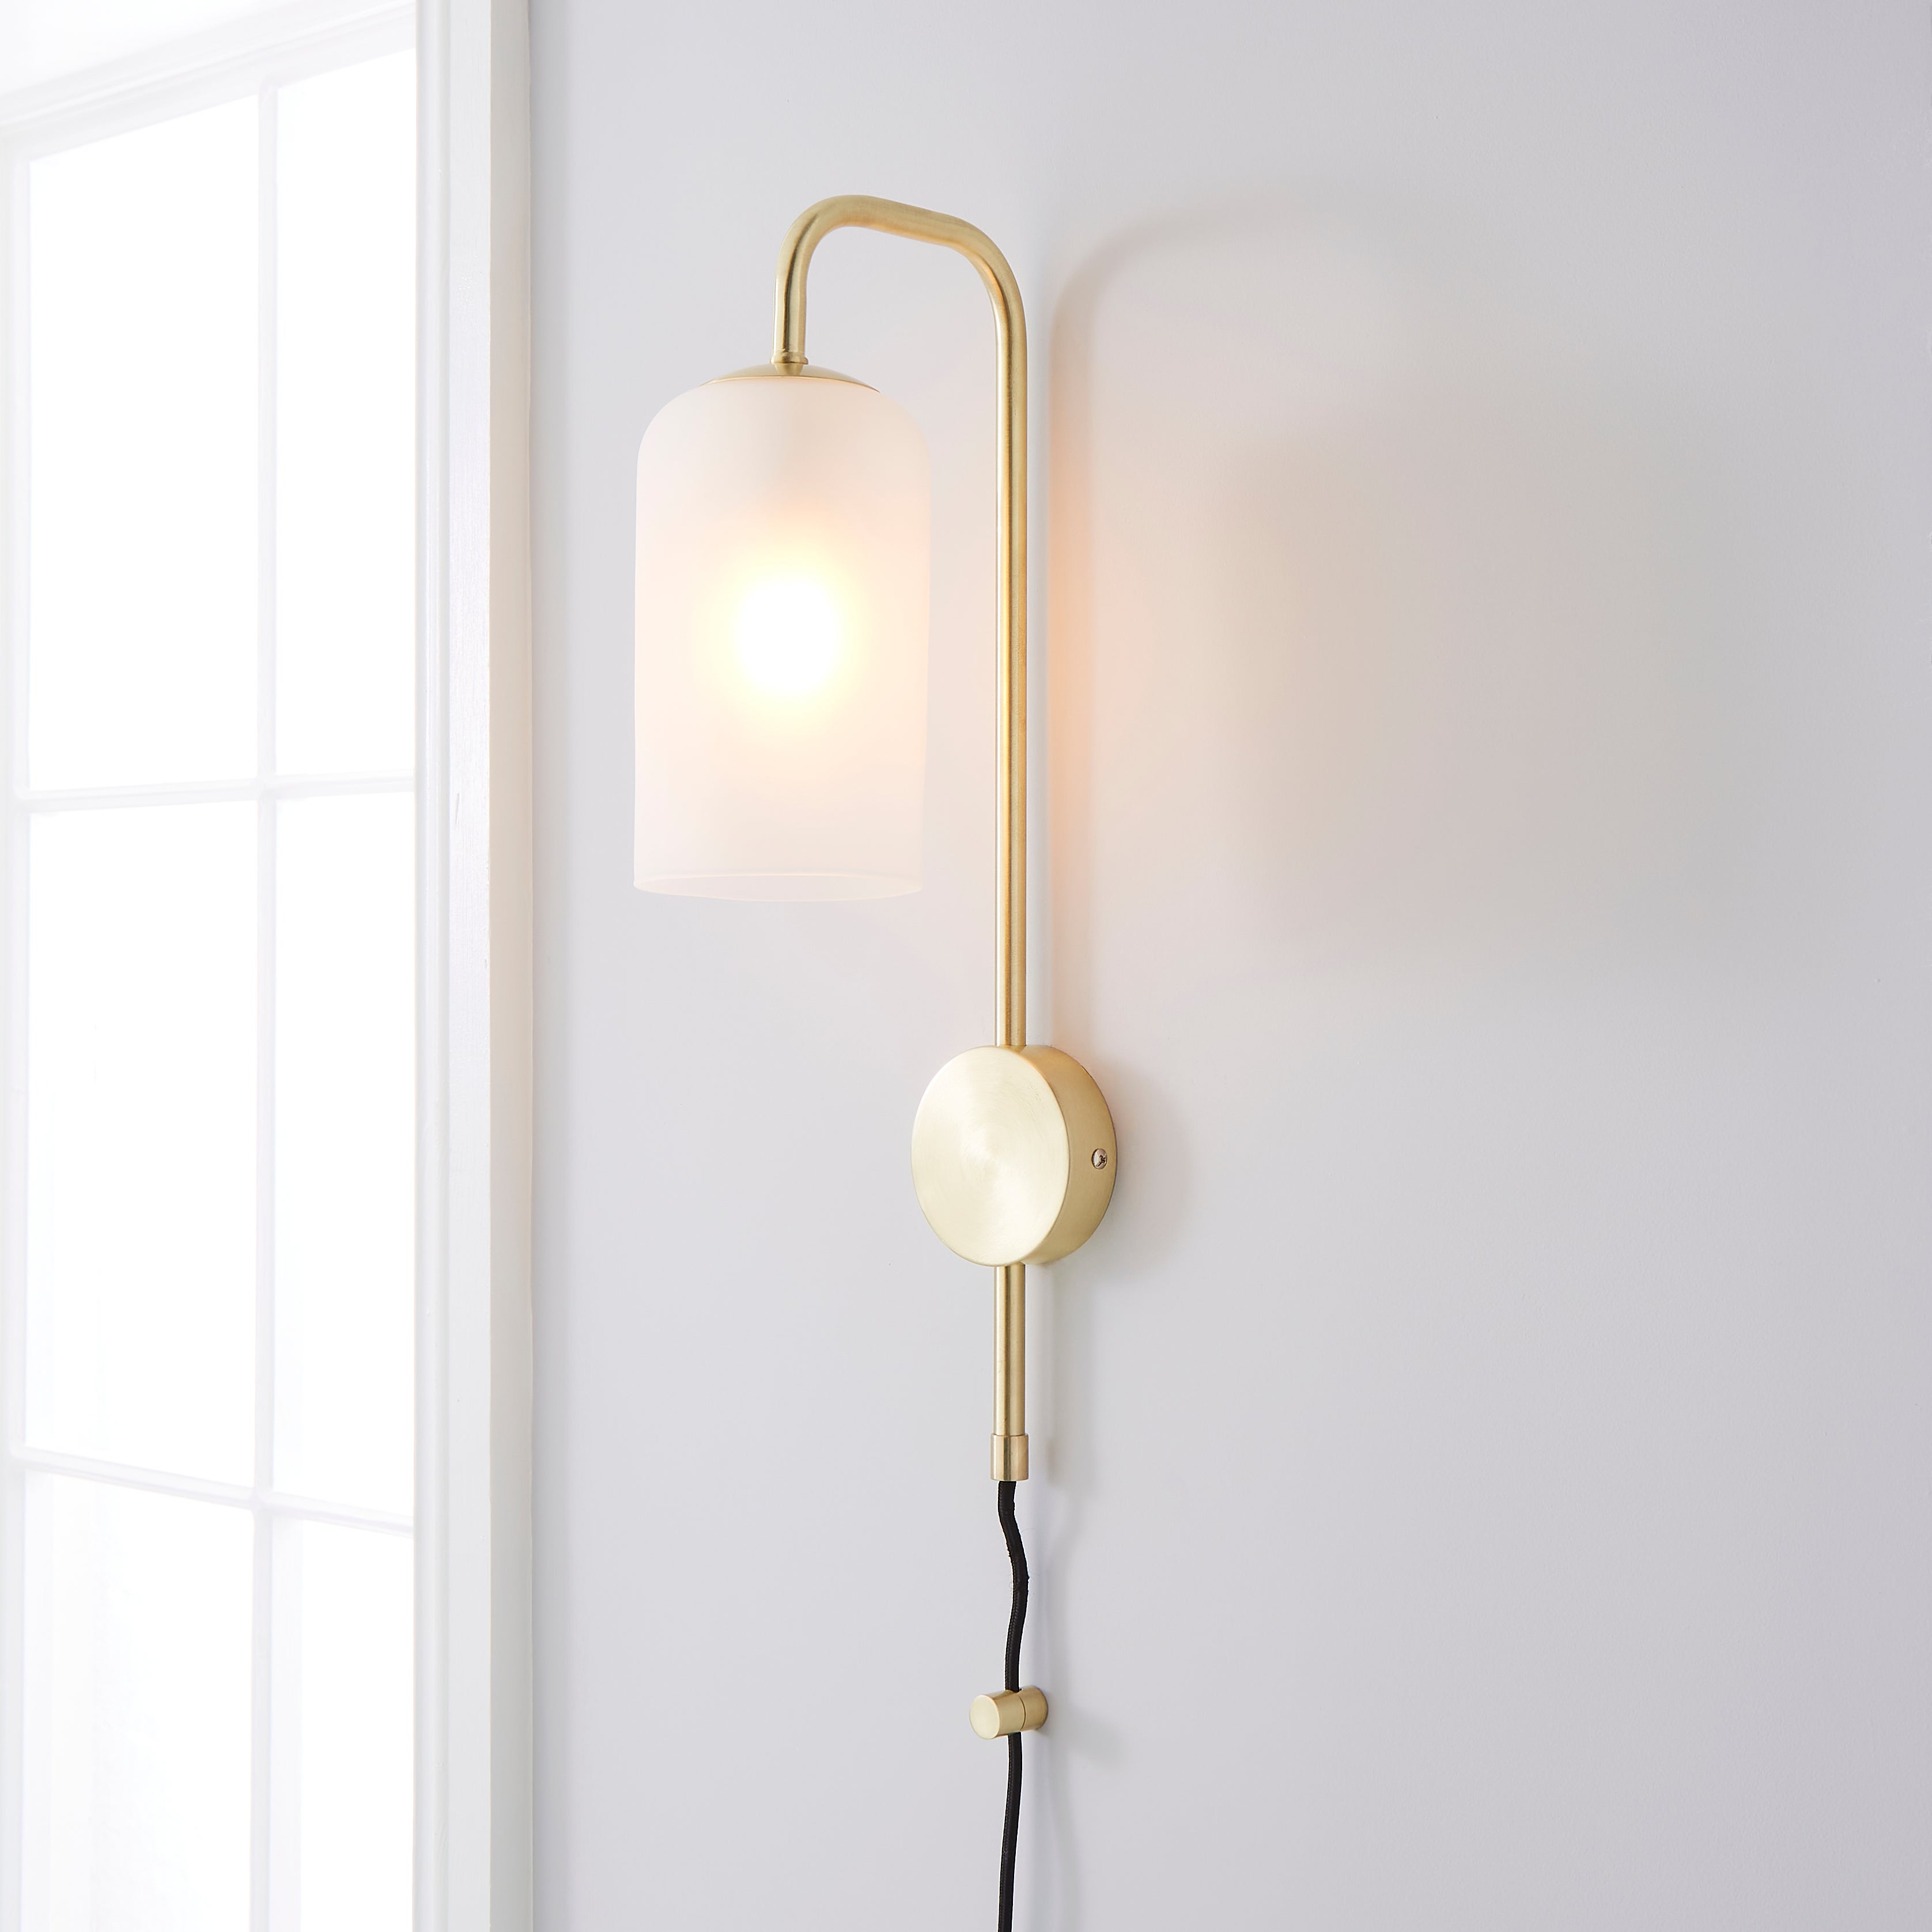 Palazzo Easy Fit Plug In Wall Light